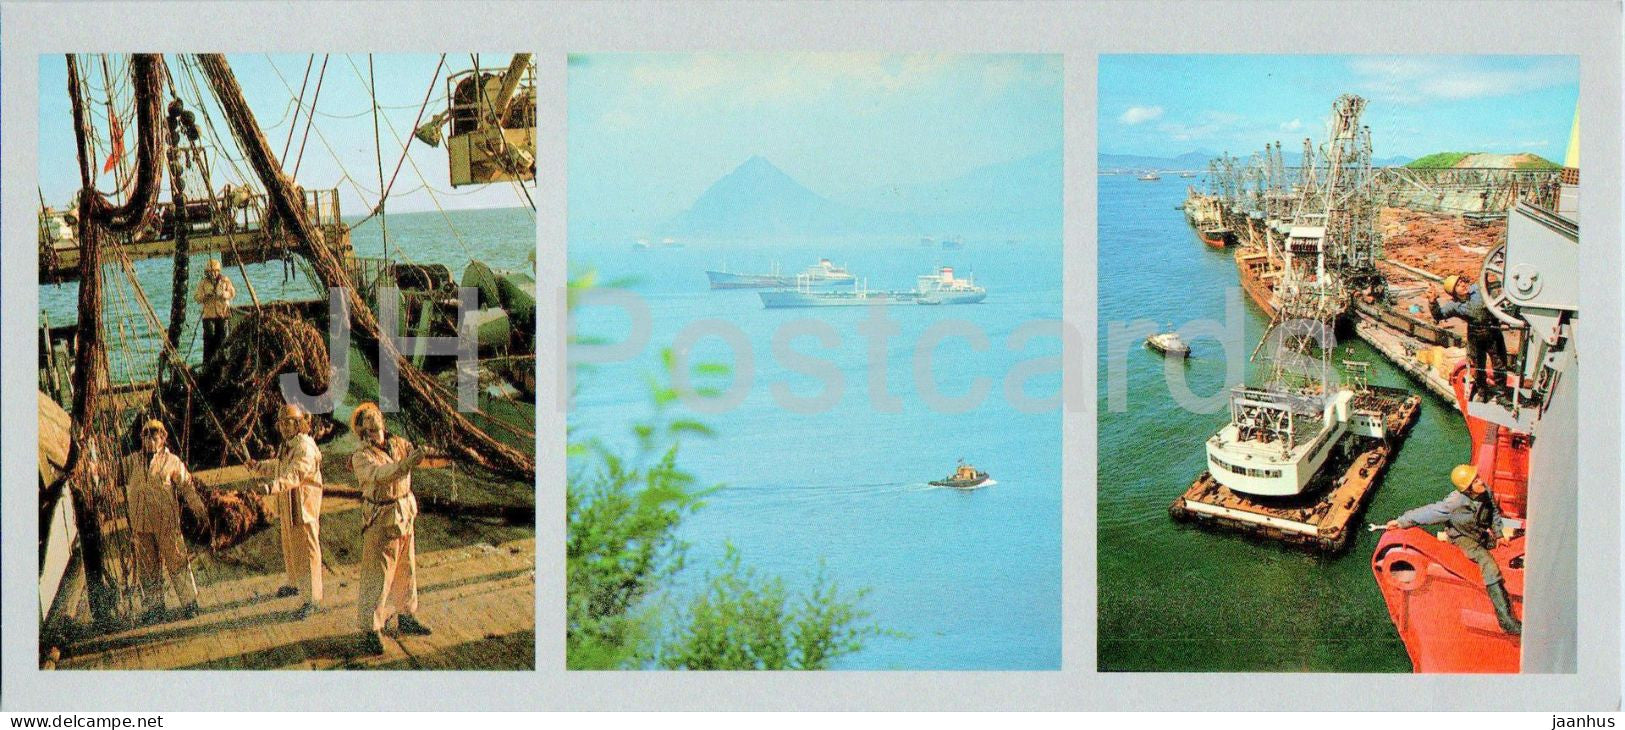 Bay of the Peter the Great - Vladivostok - port - ship - boat - 1980 - Russia USSR - unused - JH Postcards